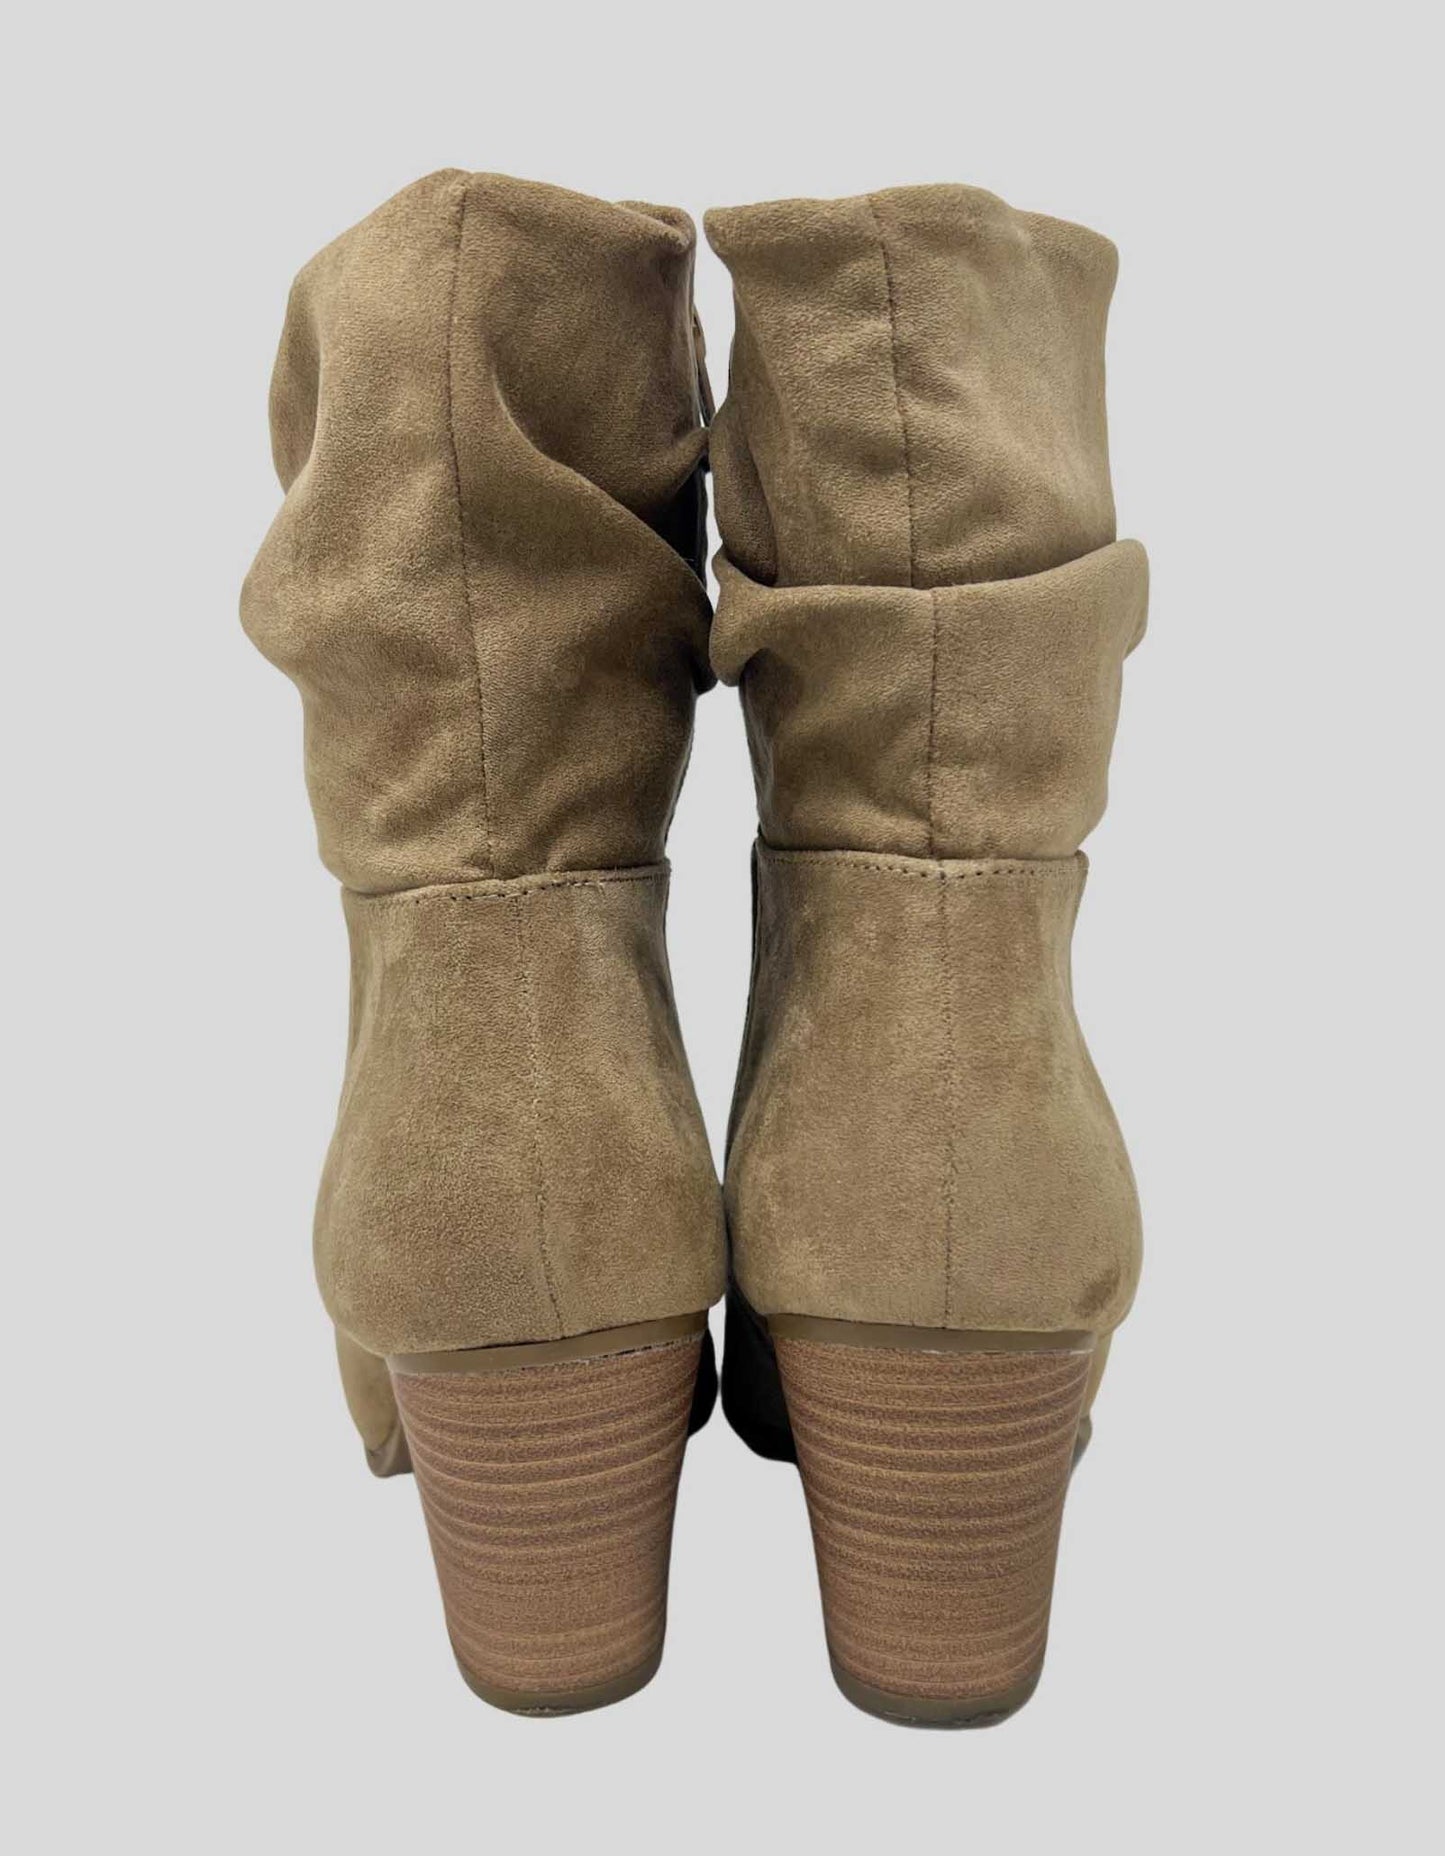 UNIVERSAL THREADS tan suede slouchy mid-calf boots - 9.5 US